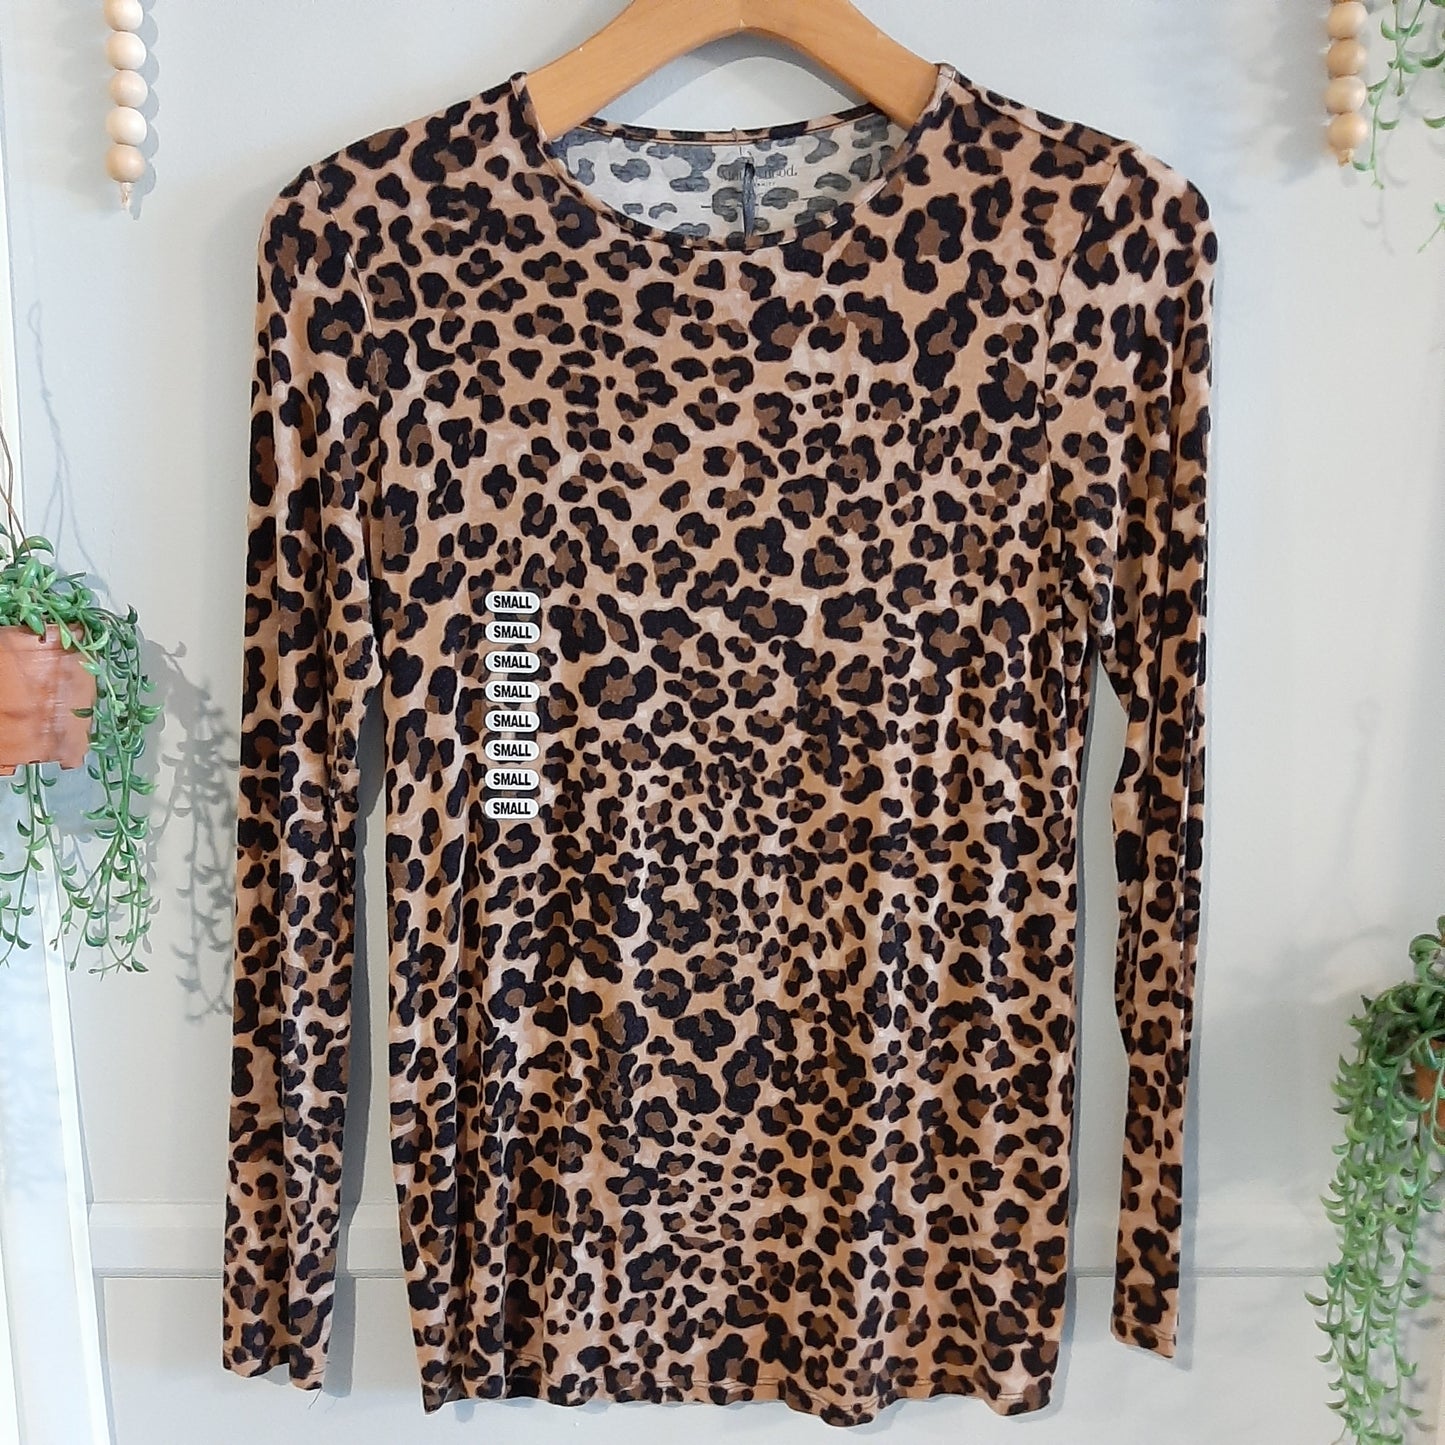 Relaxed fit crew neck LS tee, Leopard